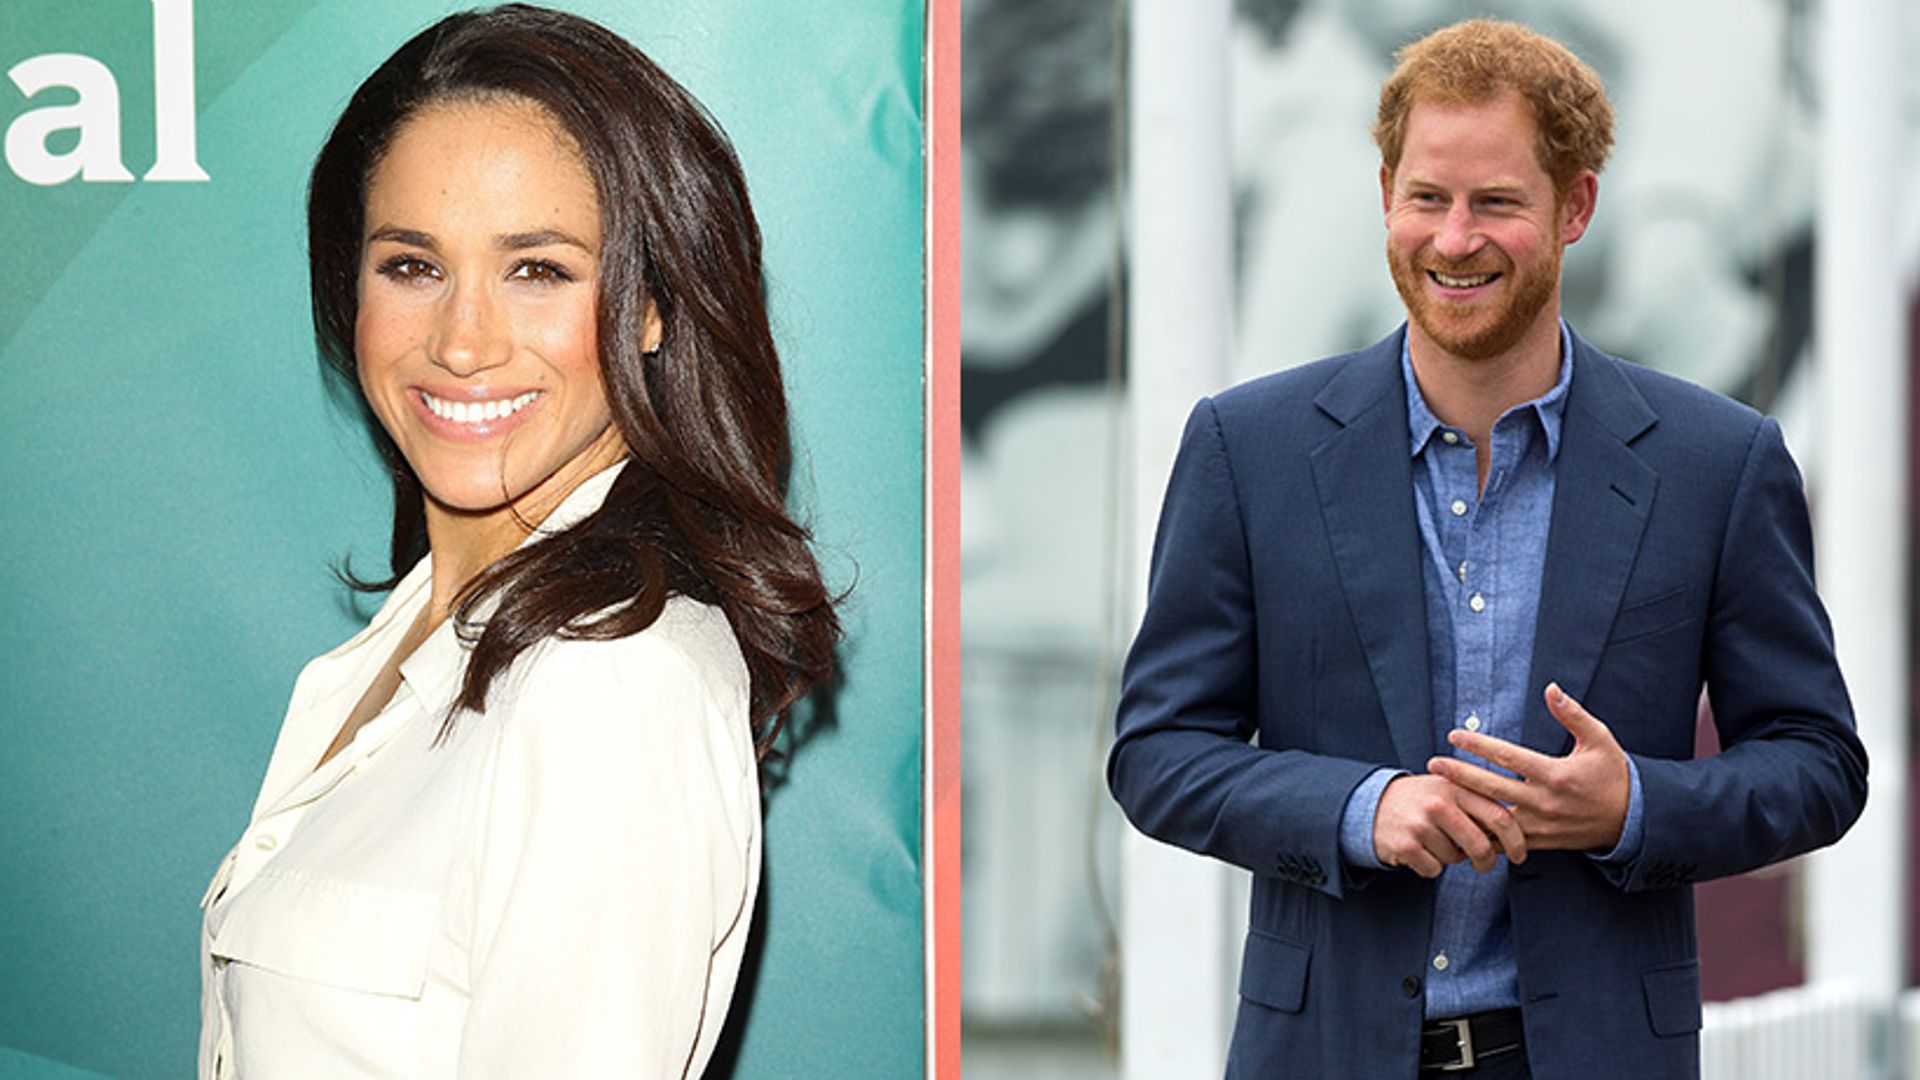 Will Meghan Markle use her first name Rachel if she marries Prince Harry?